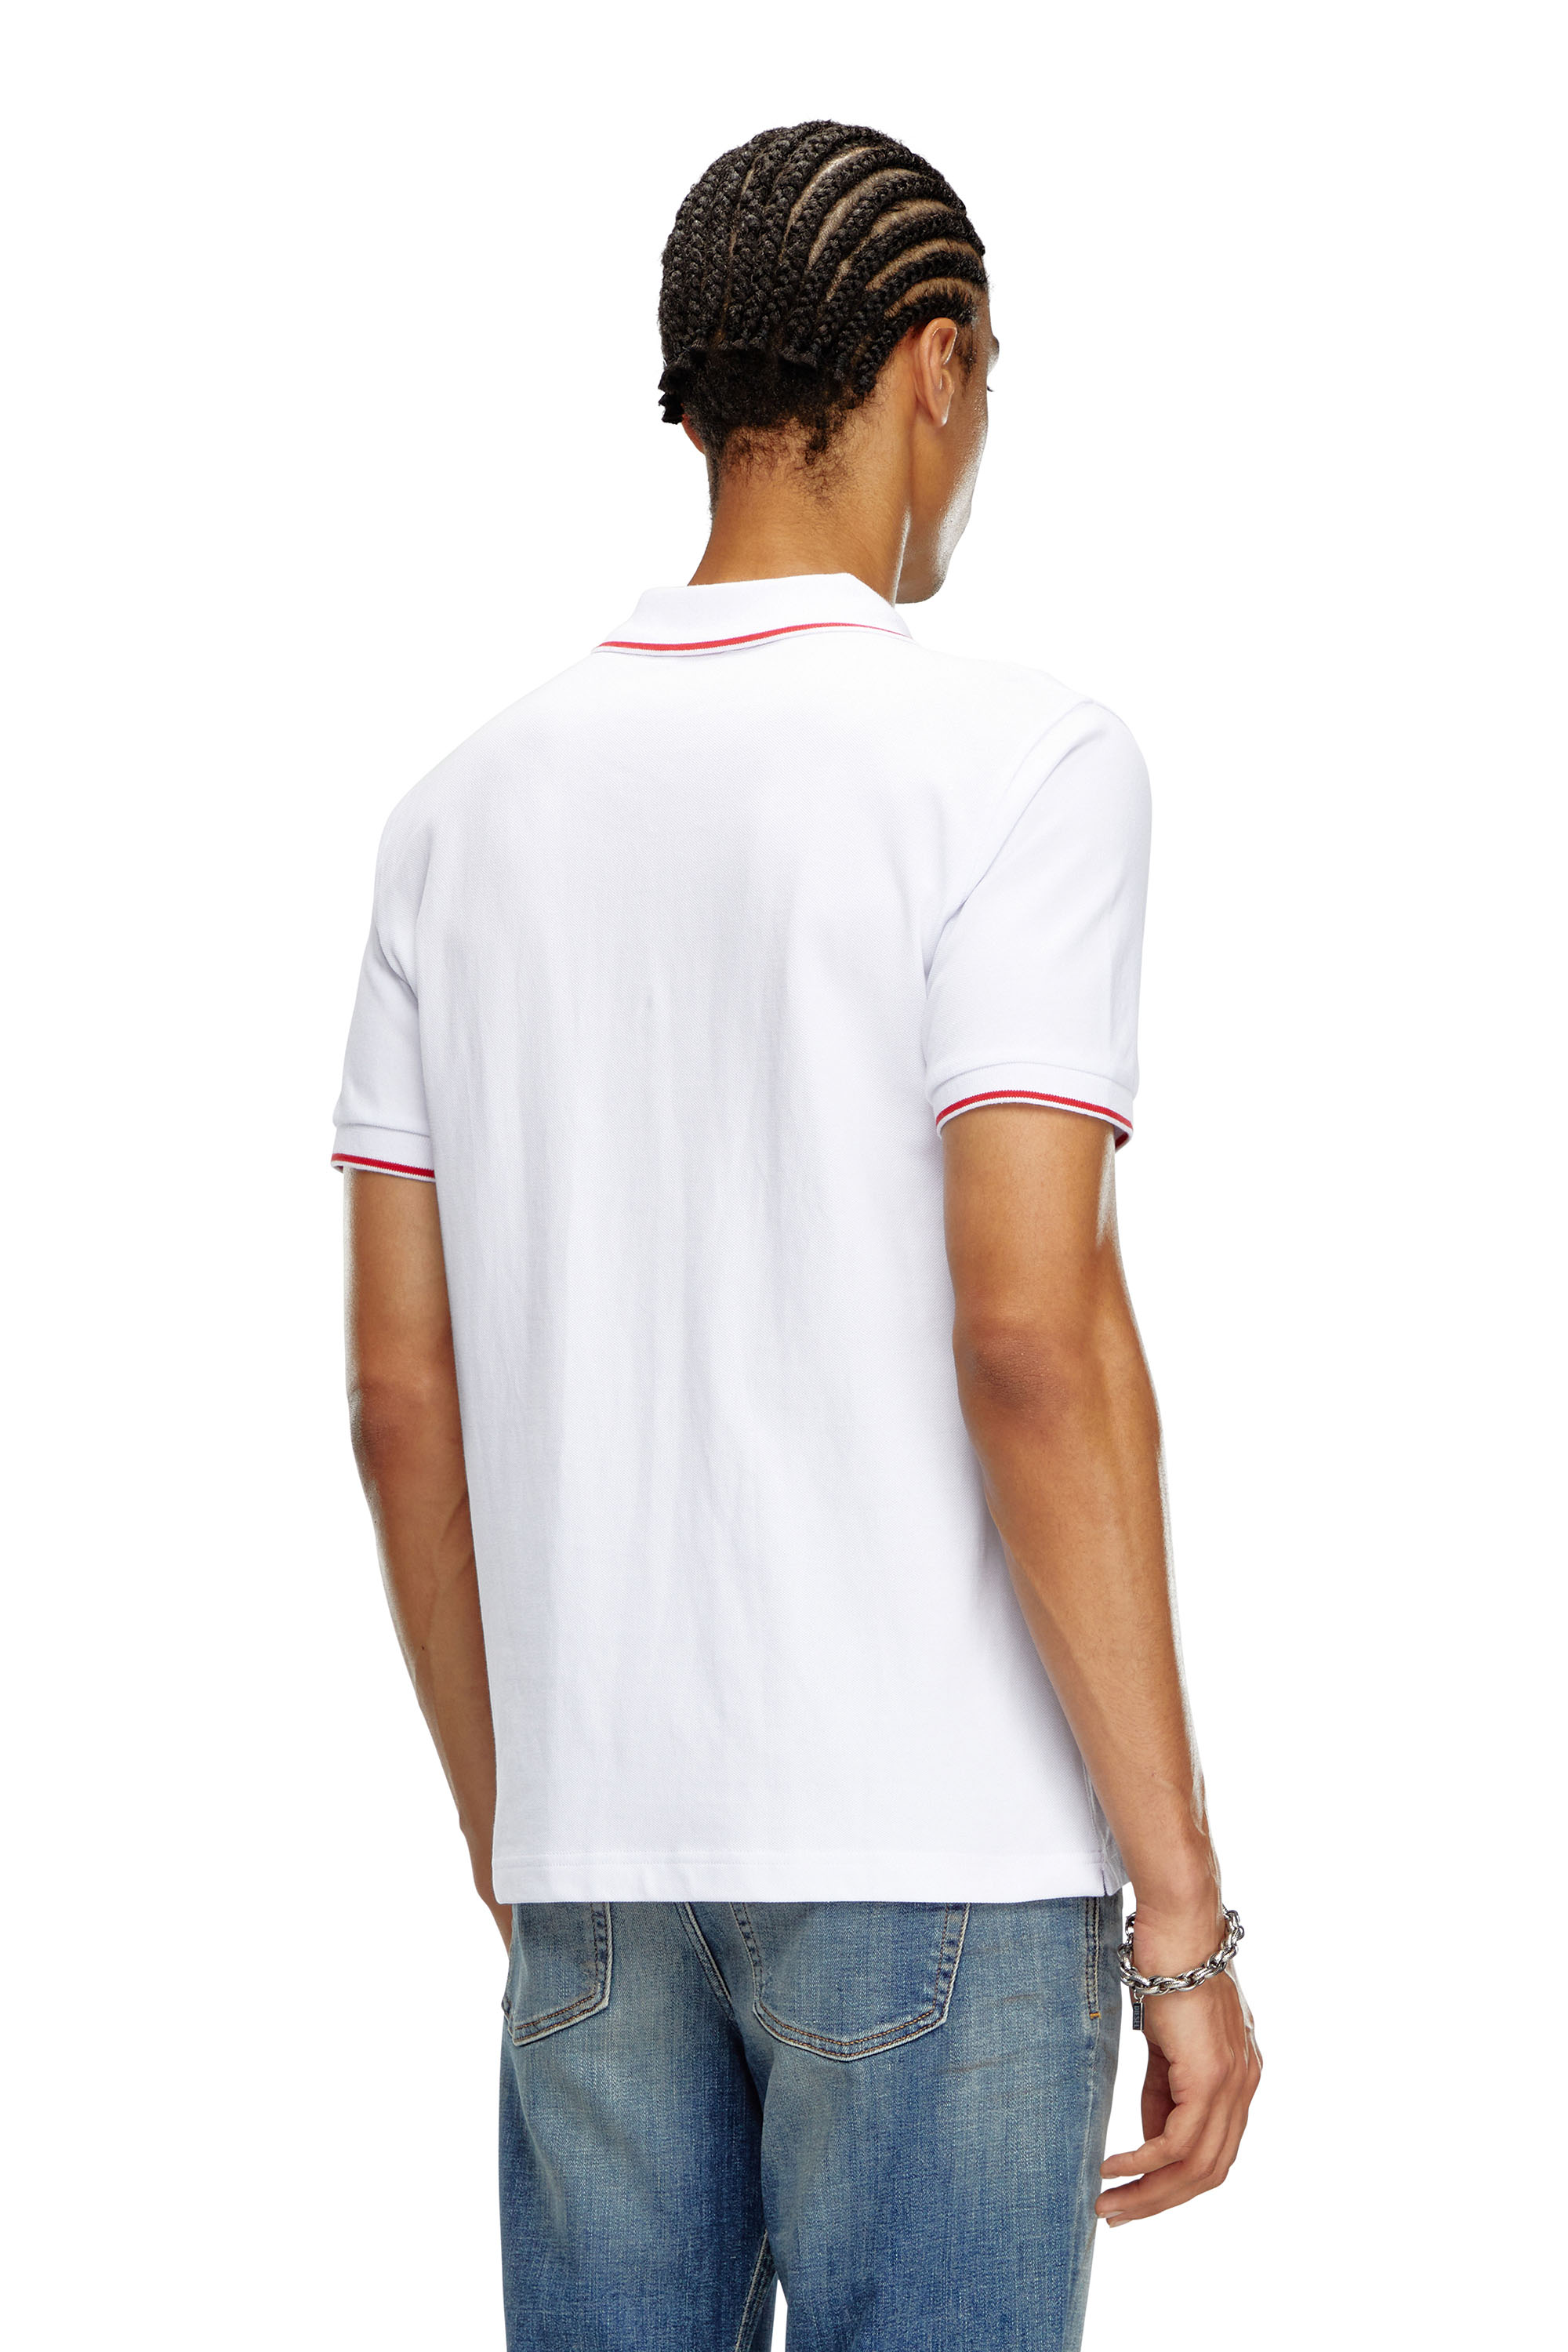 Diesel - T-FERRY-MICRODIV, Man Polo shirt with micro Diesel embroidery in White - Image 4